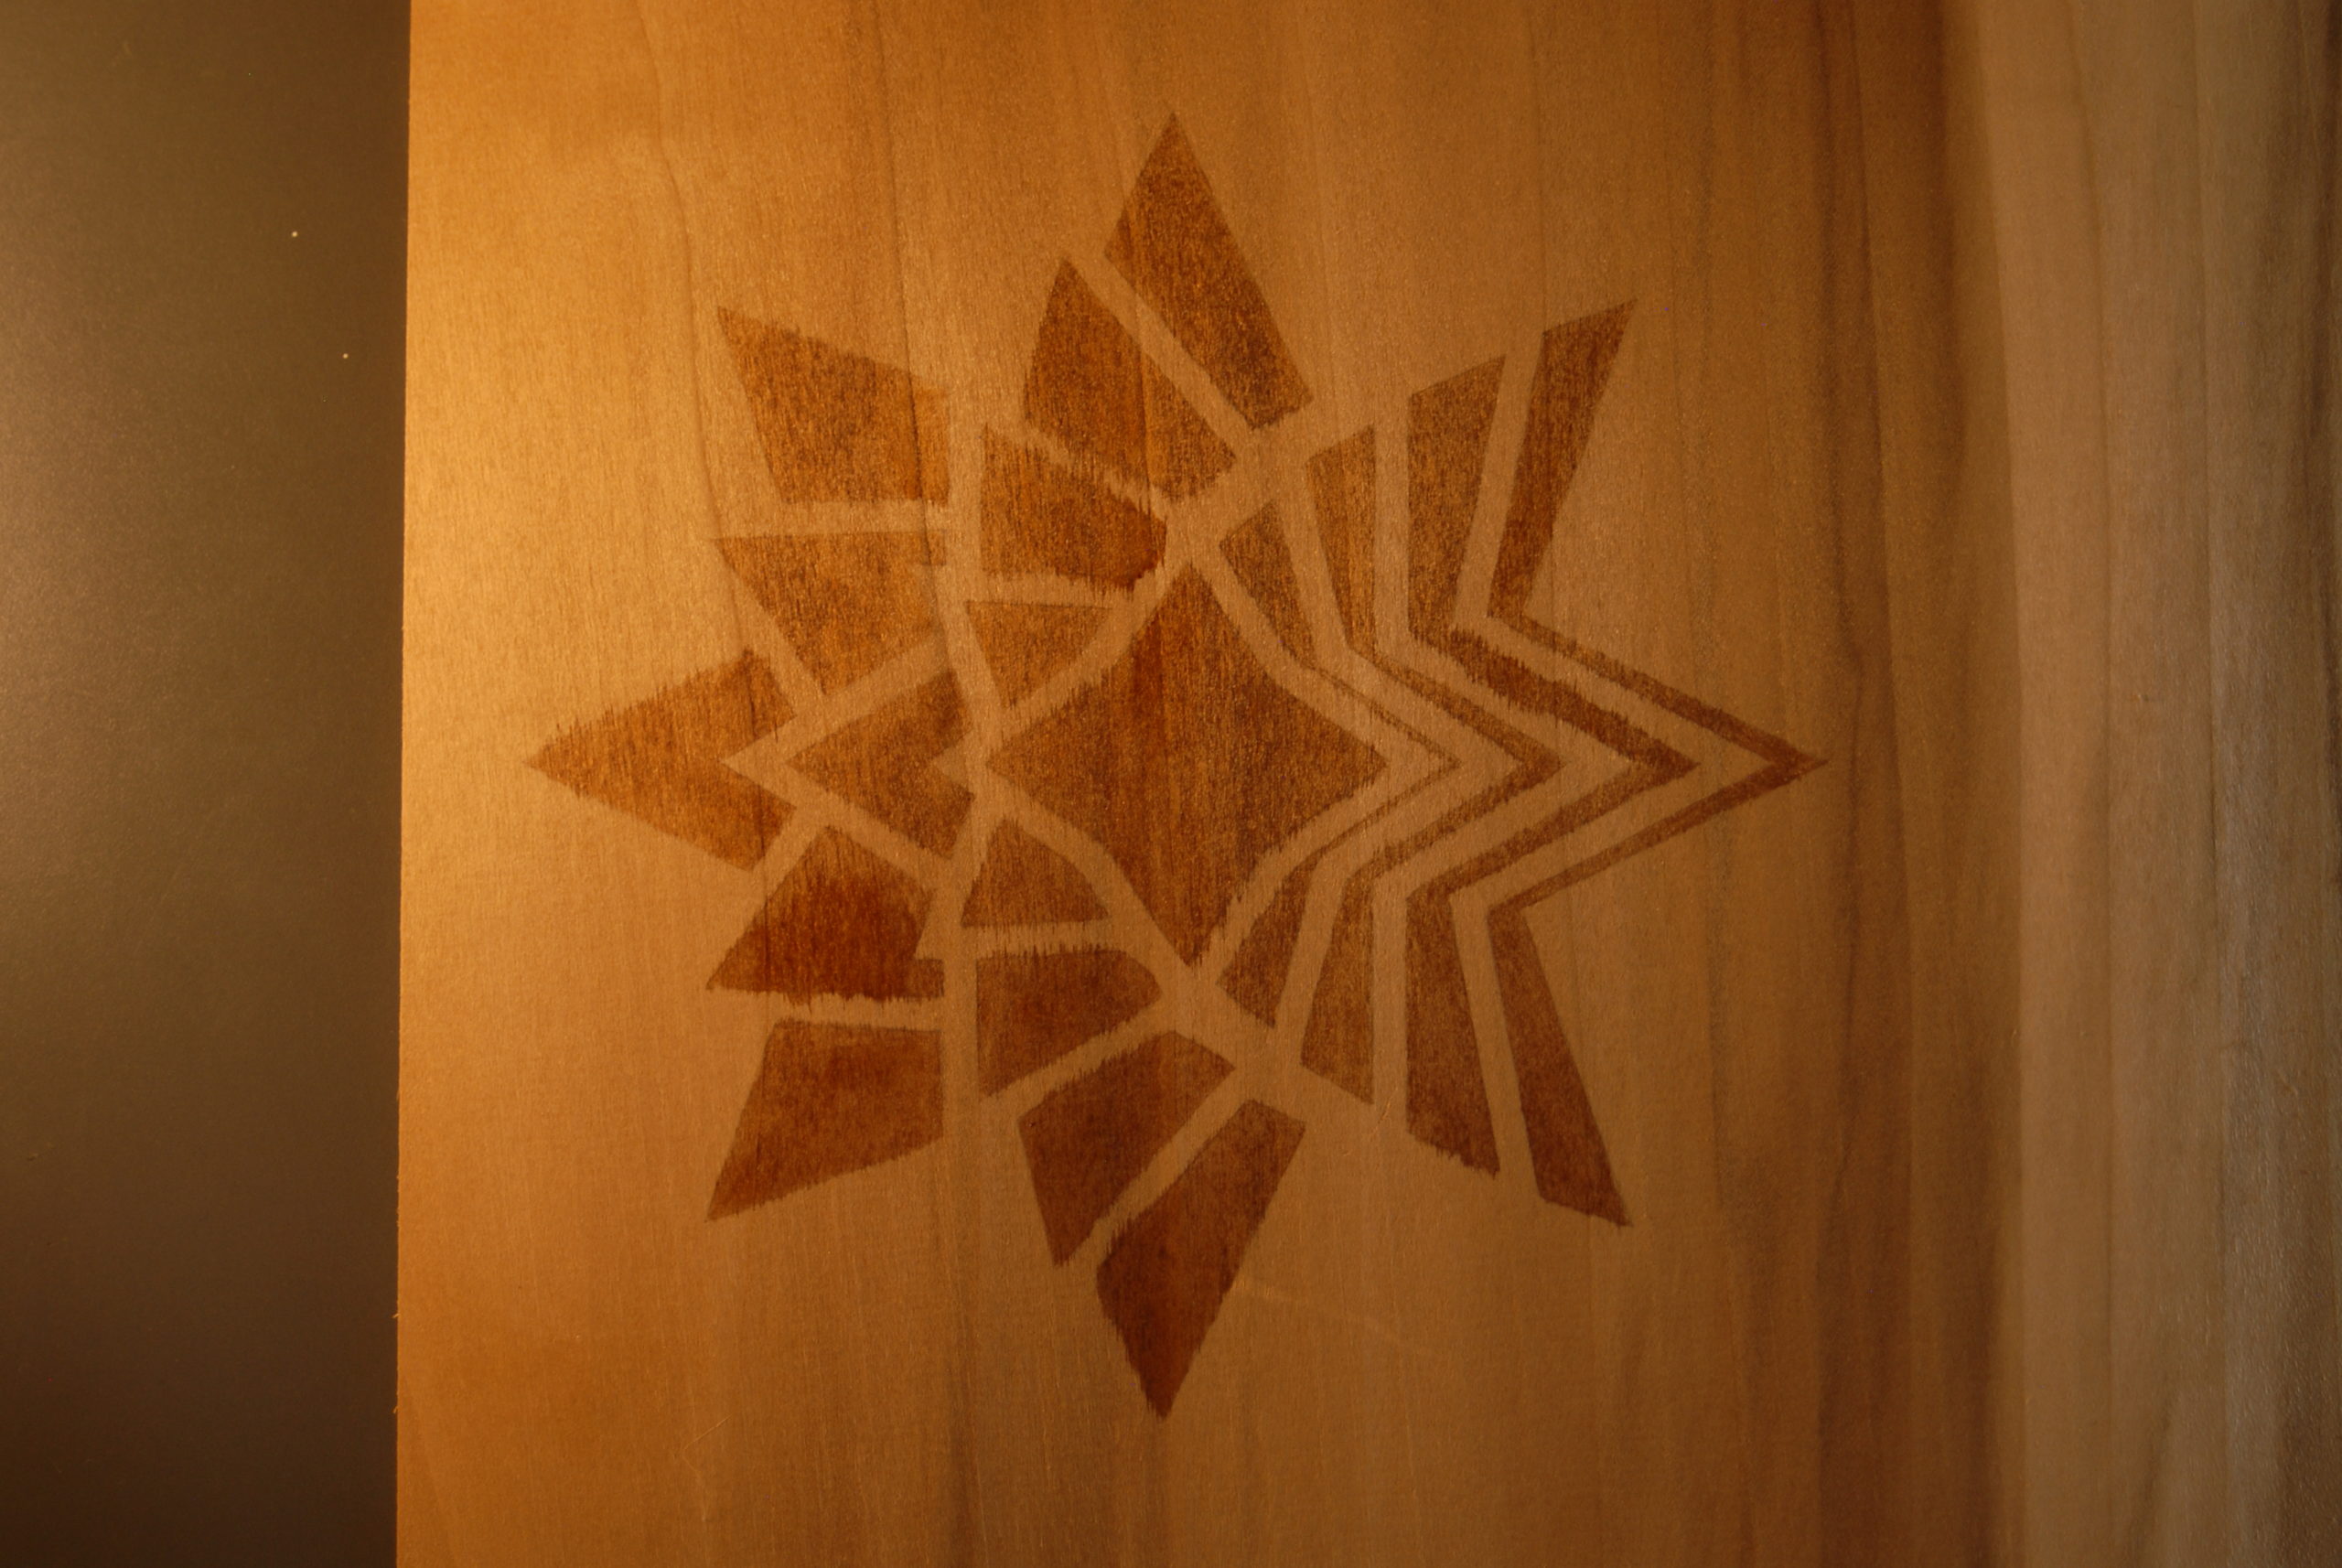 hail logo on stained wood